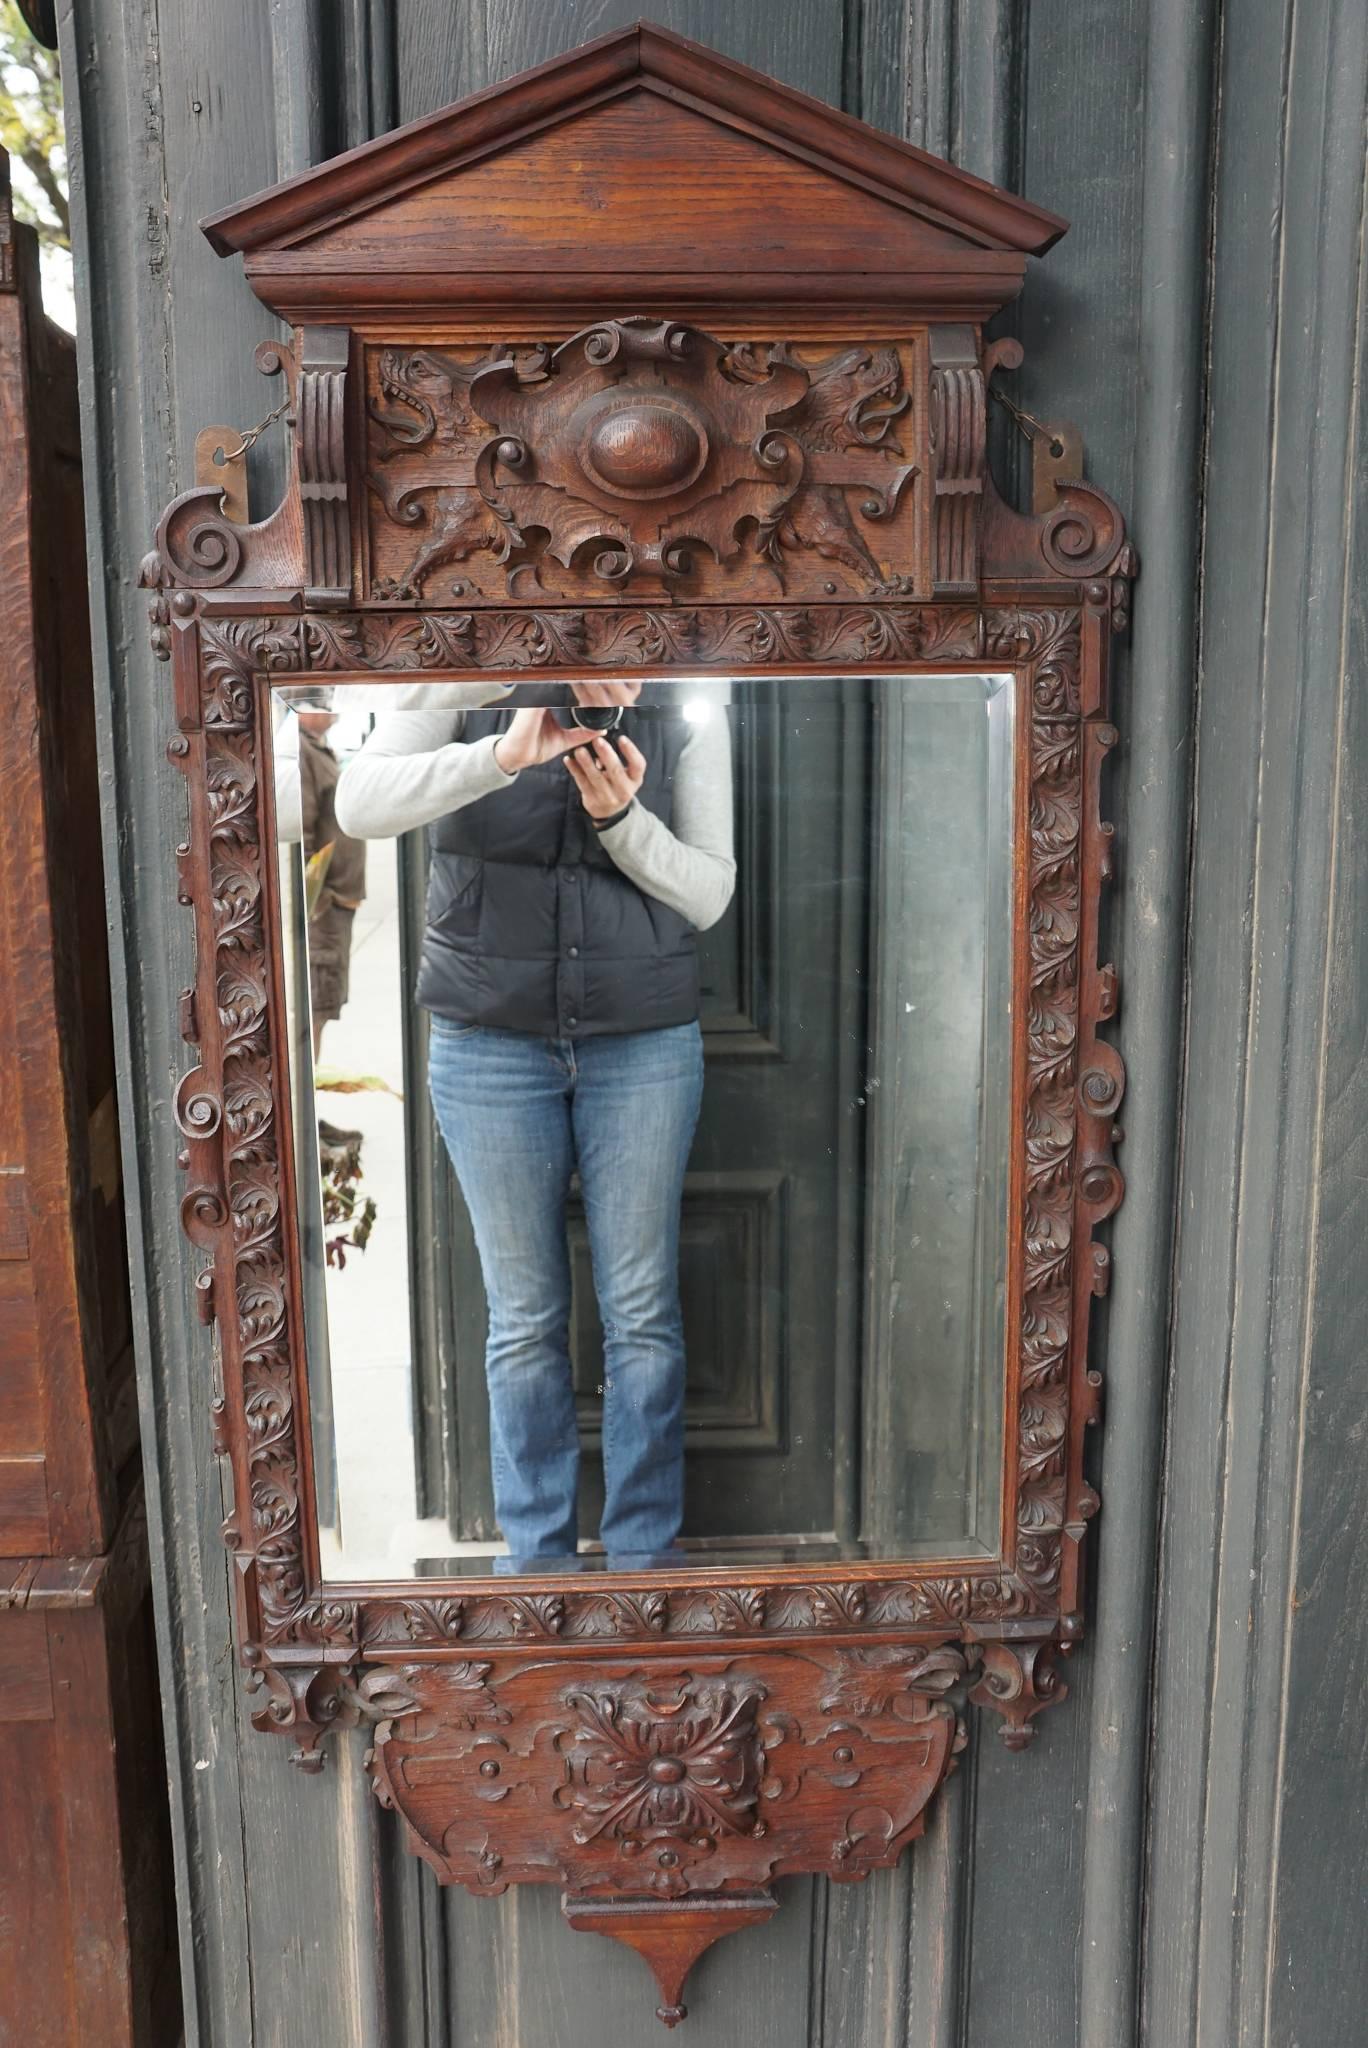 This incredibly stylish mirror done in the Georgian style was made in England, circa 1850. The Palladian styling favored by the likes of Chippendale and others is shown here in an Early Victorian frame. Carved in oak a wood hard to carve but capable